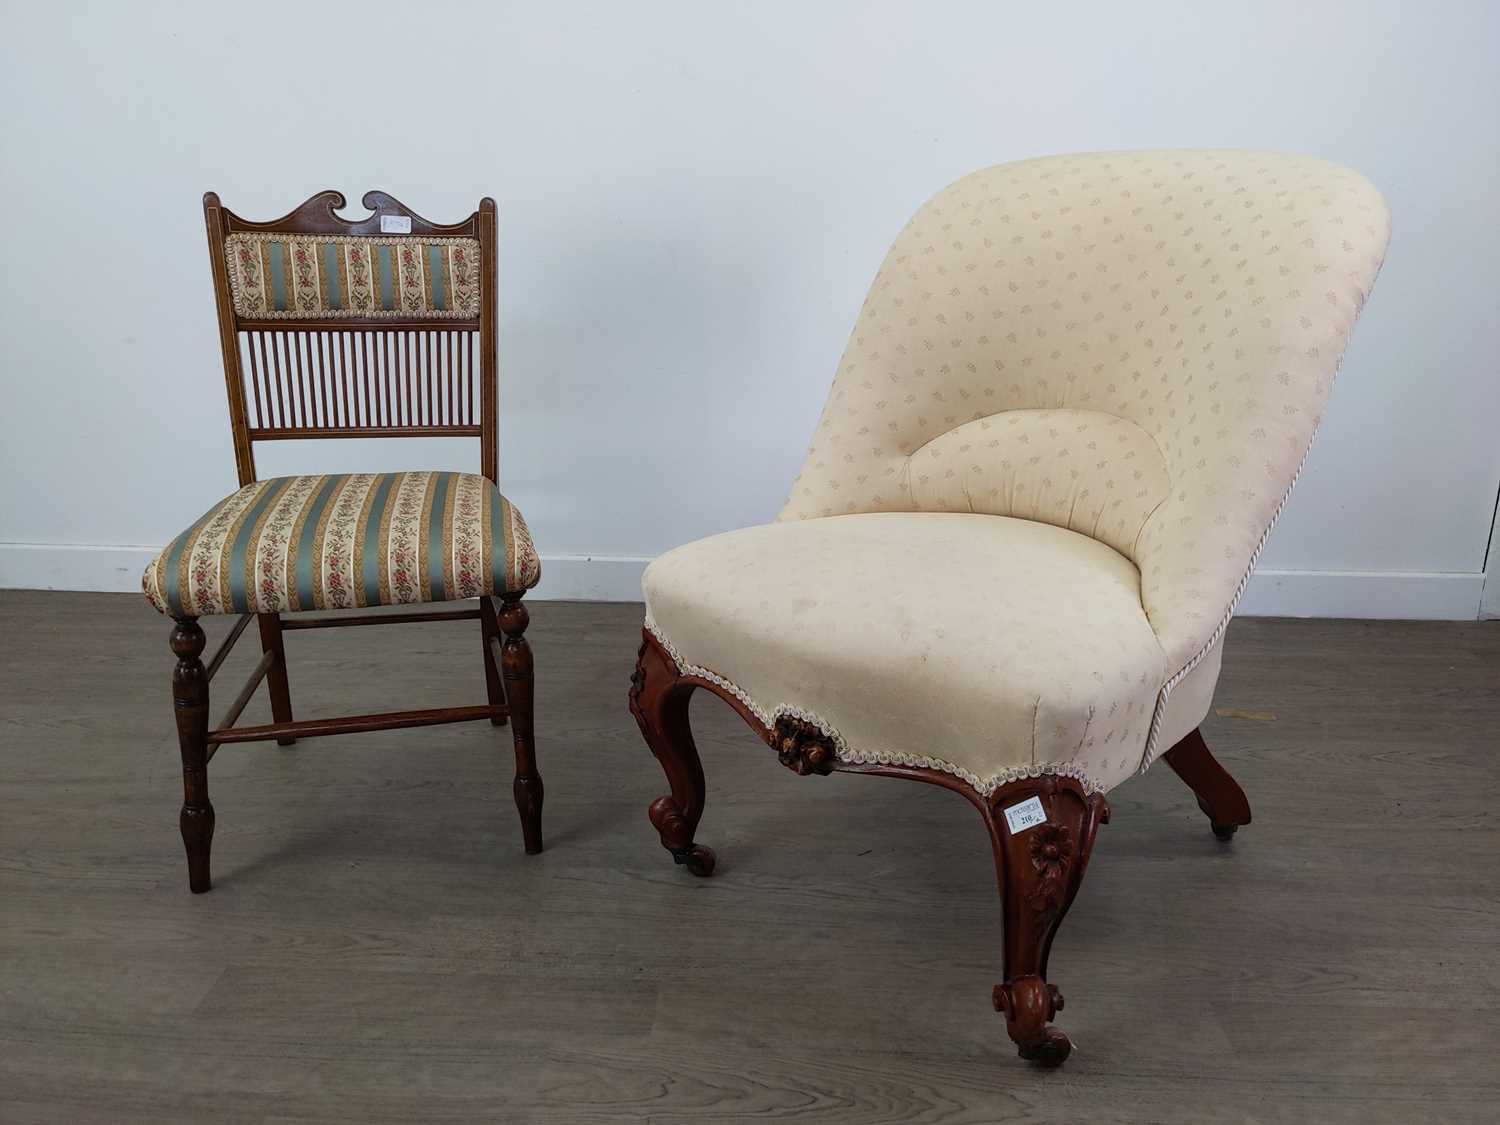 A VICTORIAN NURSING CHAIR ALONG WITH A BEDROOM CHAIR